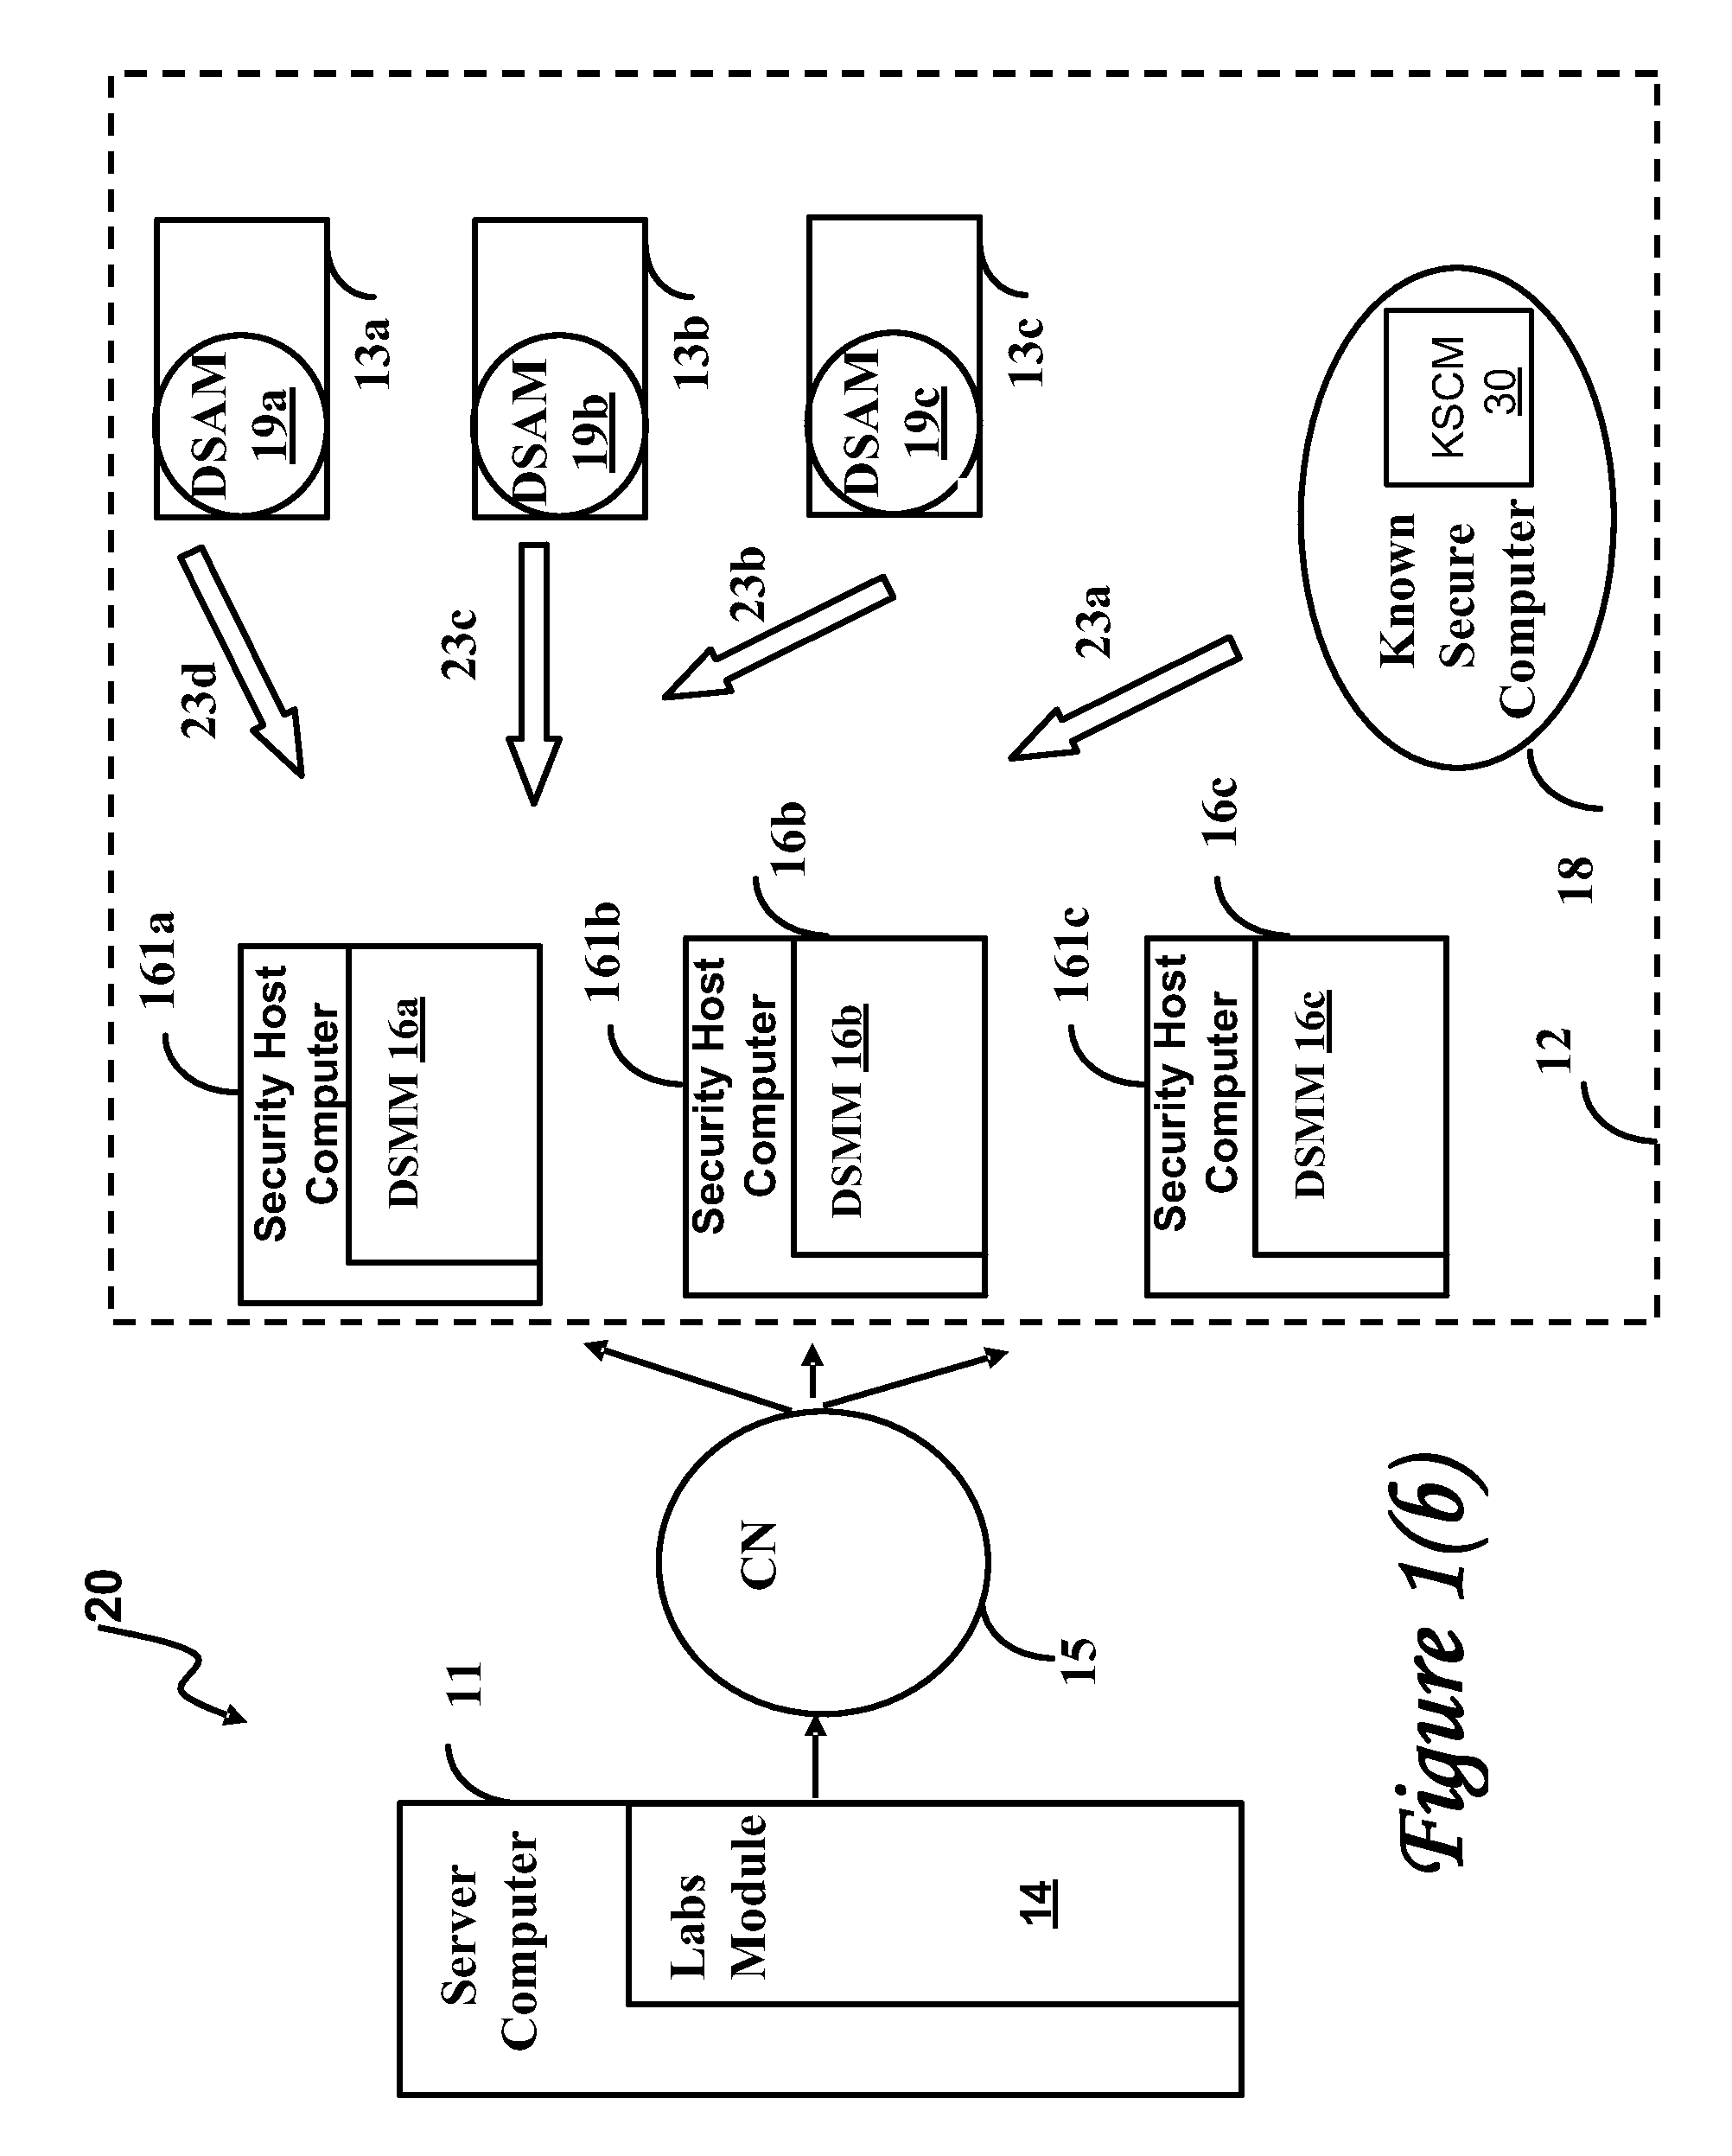 Method and system for real time classification of events in computer integrity system